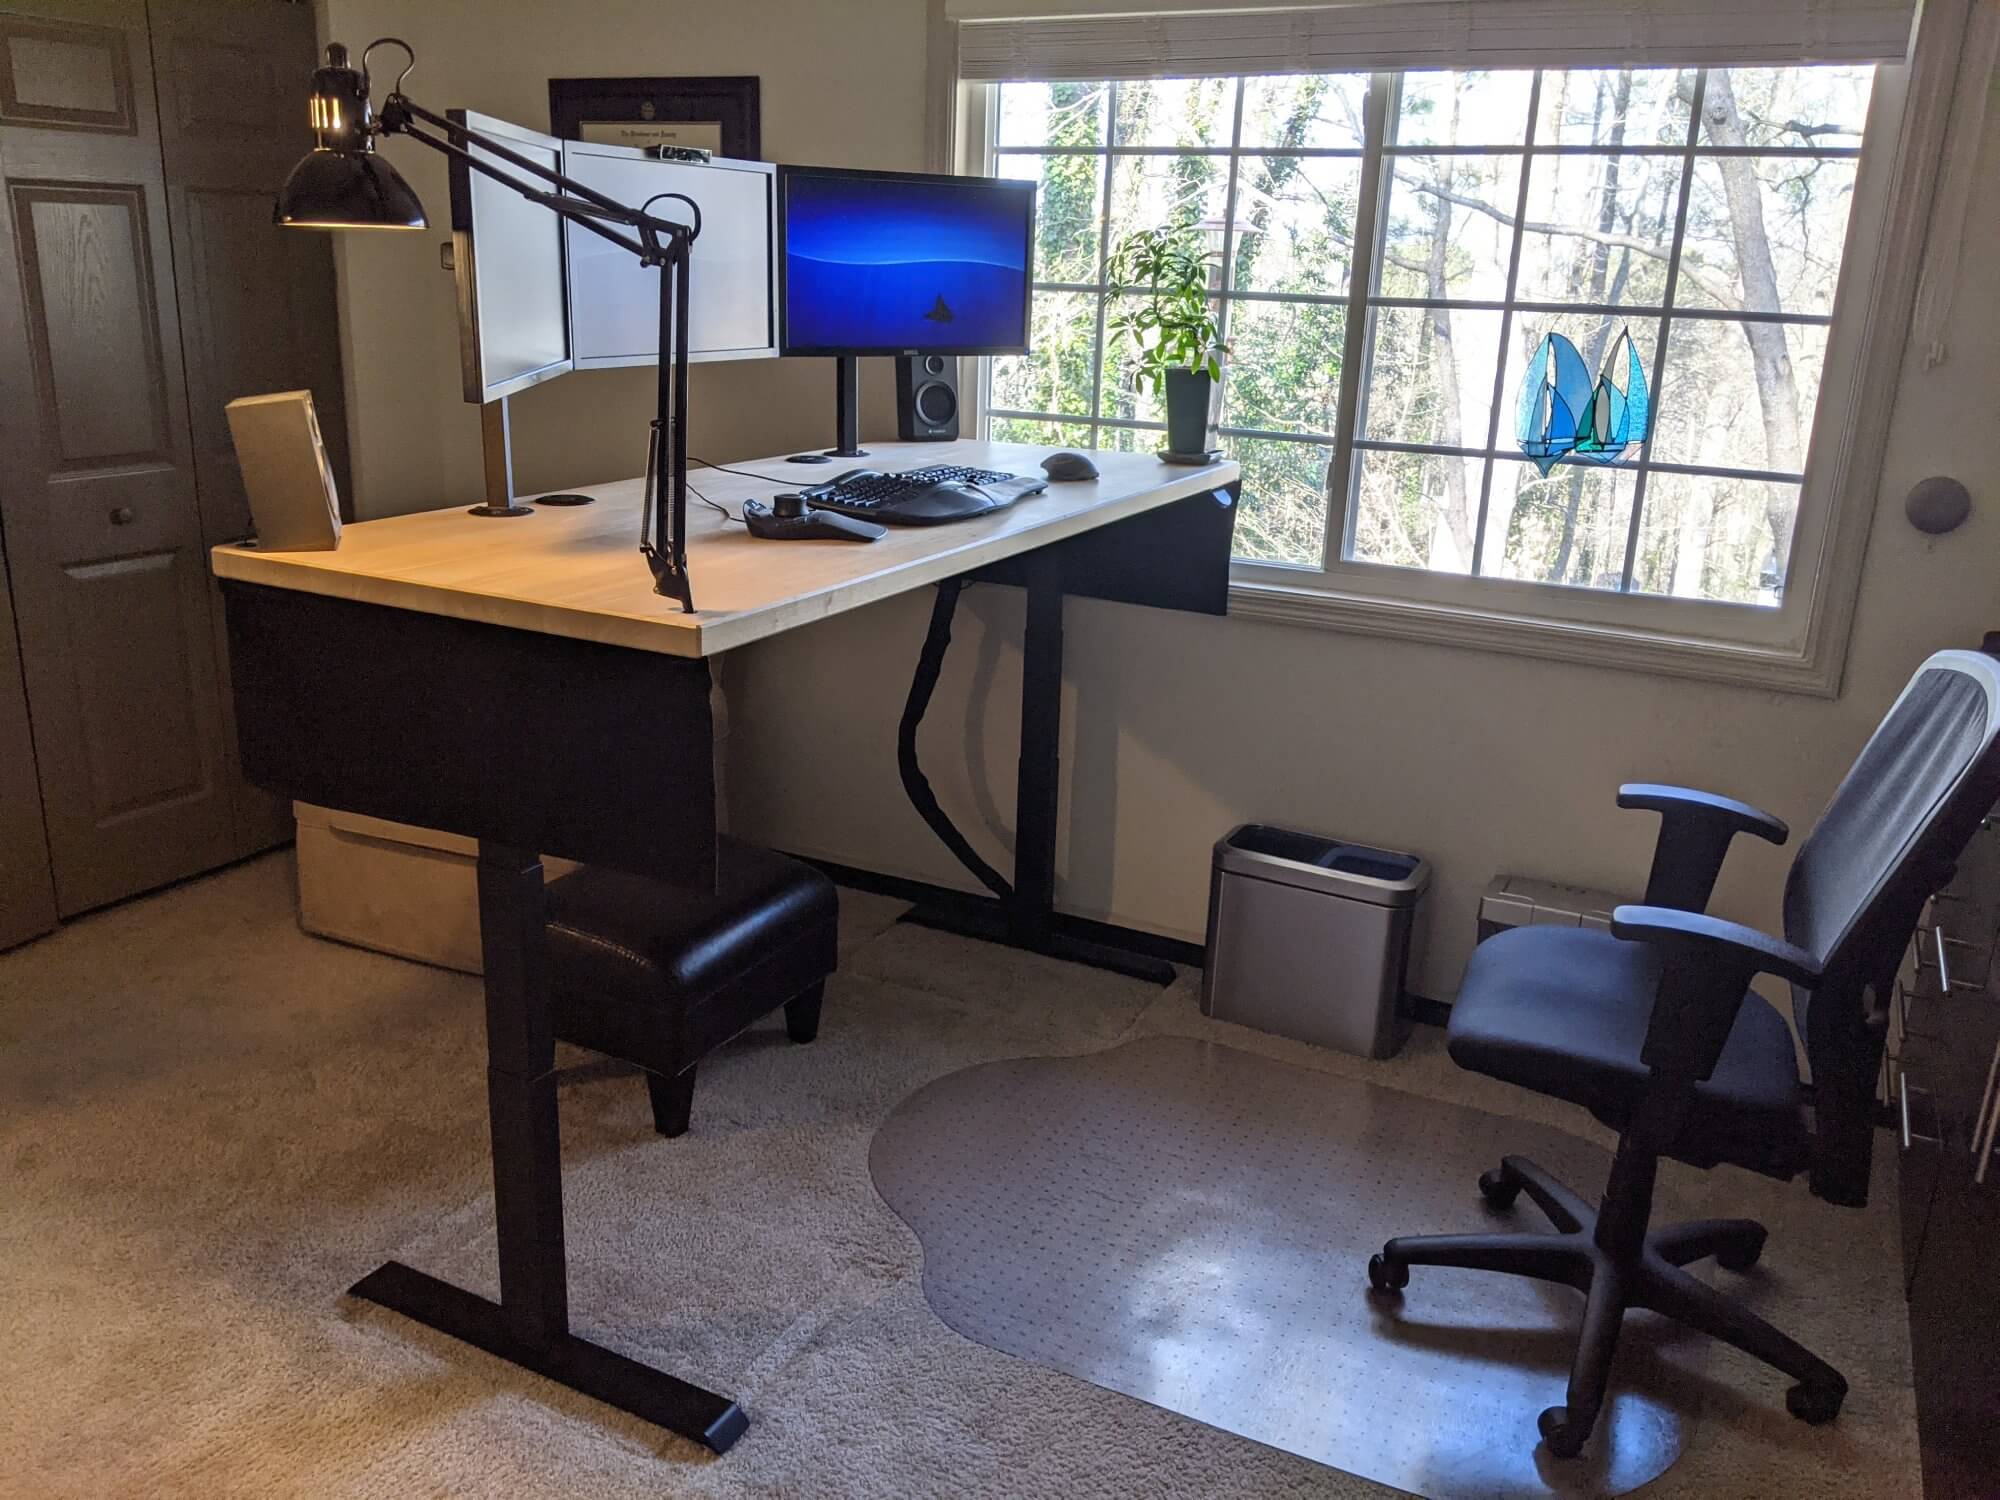 An Apex sit-stand desk with a butcher block countertop